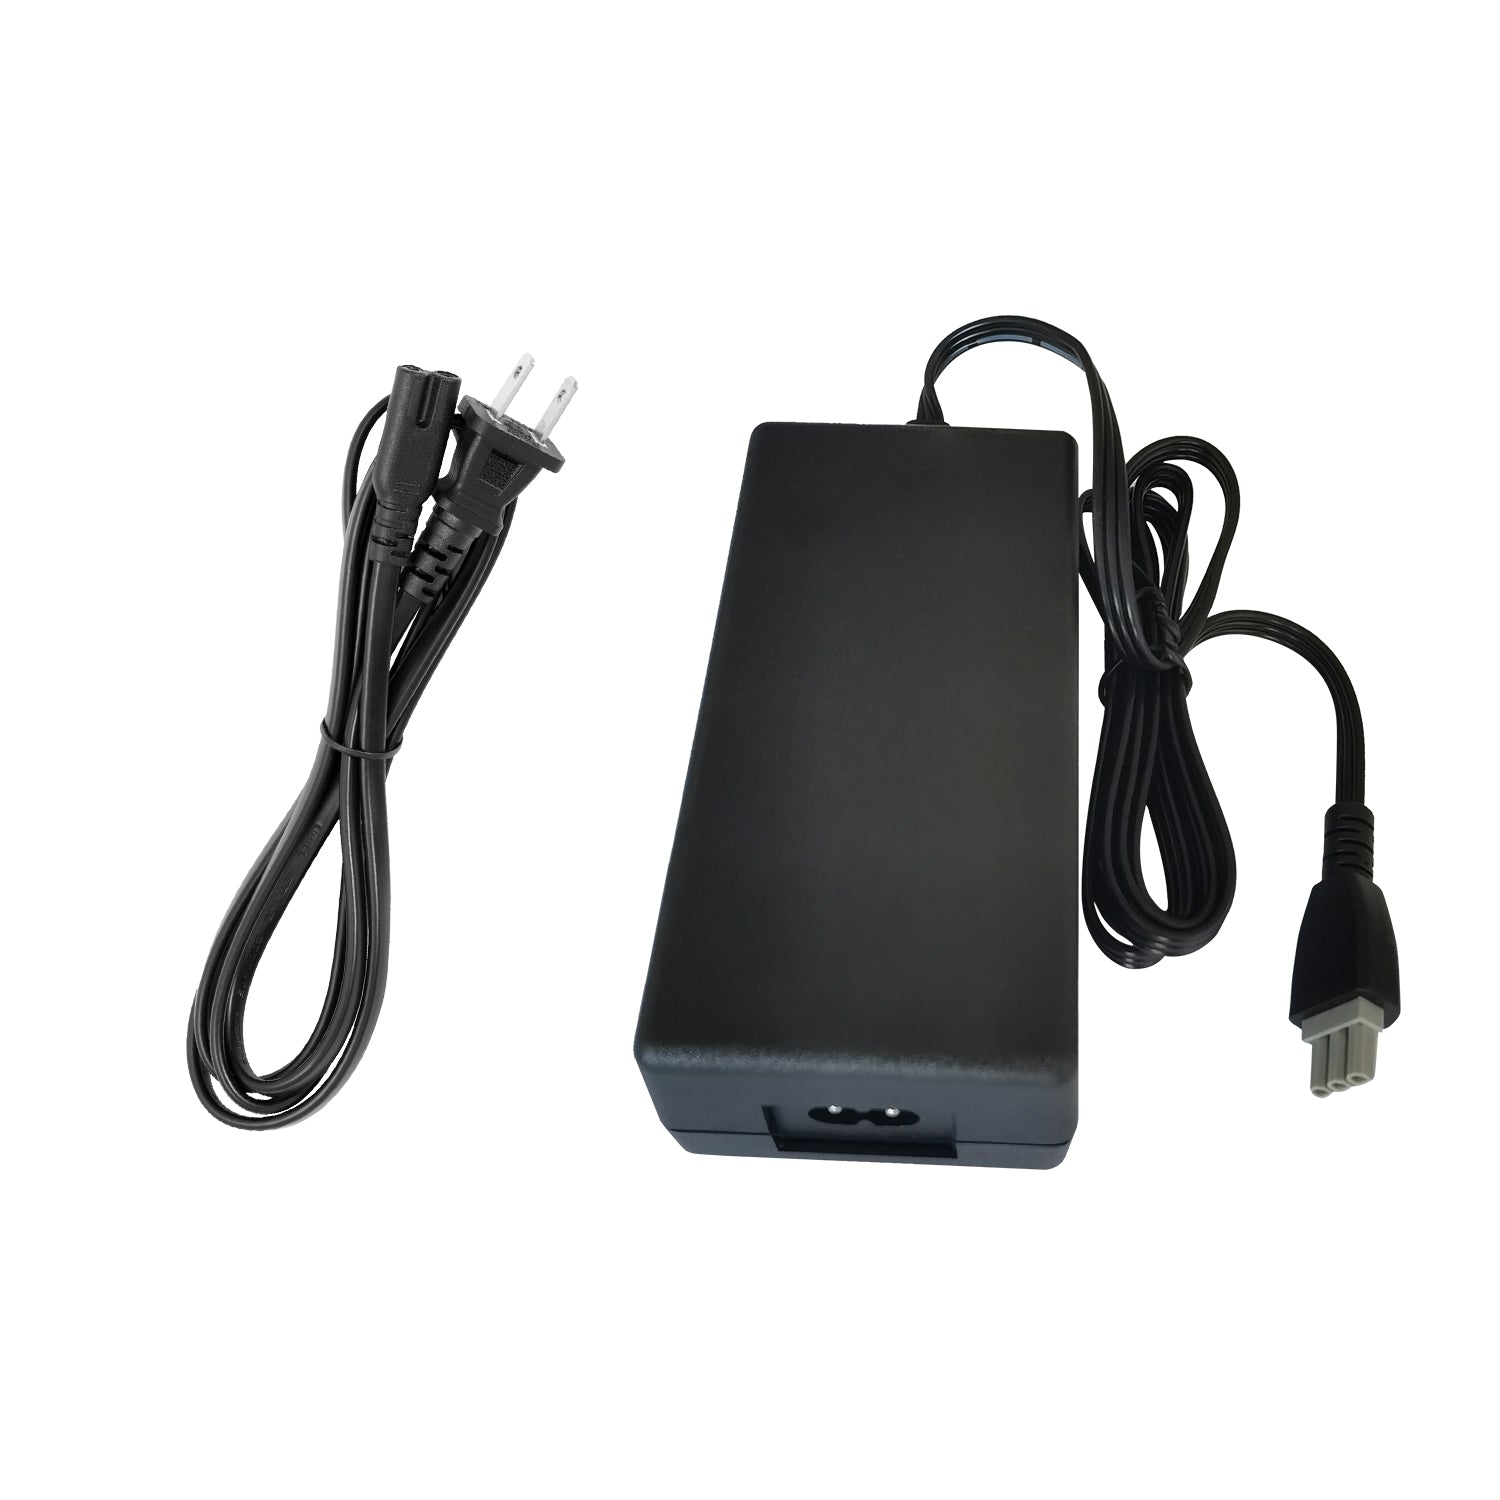 Power Adapter for hp cb584a Printer.